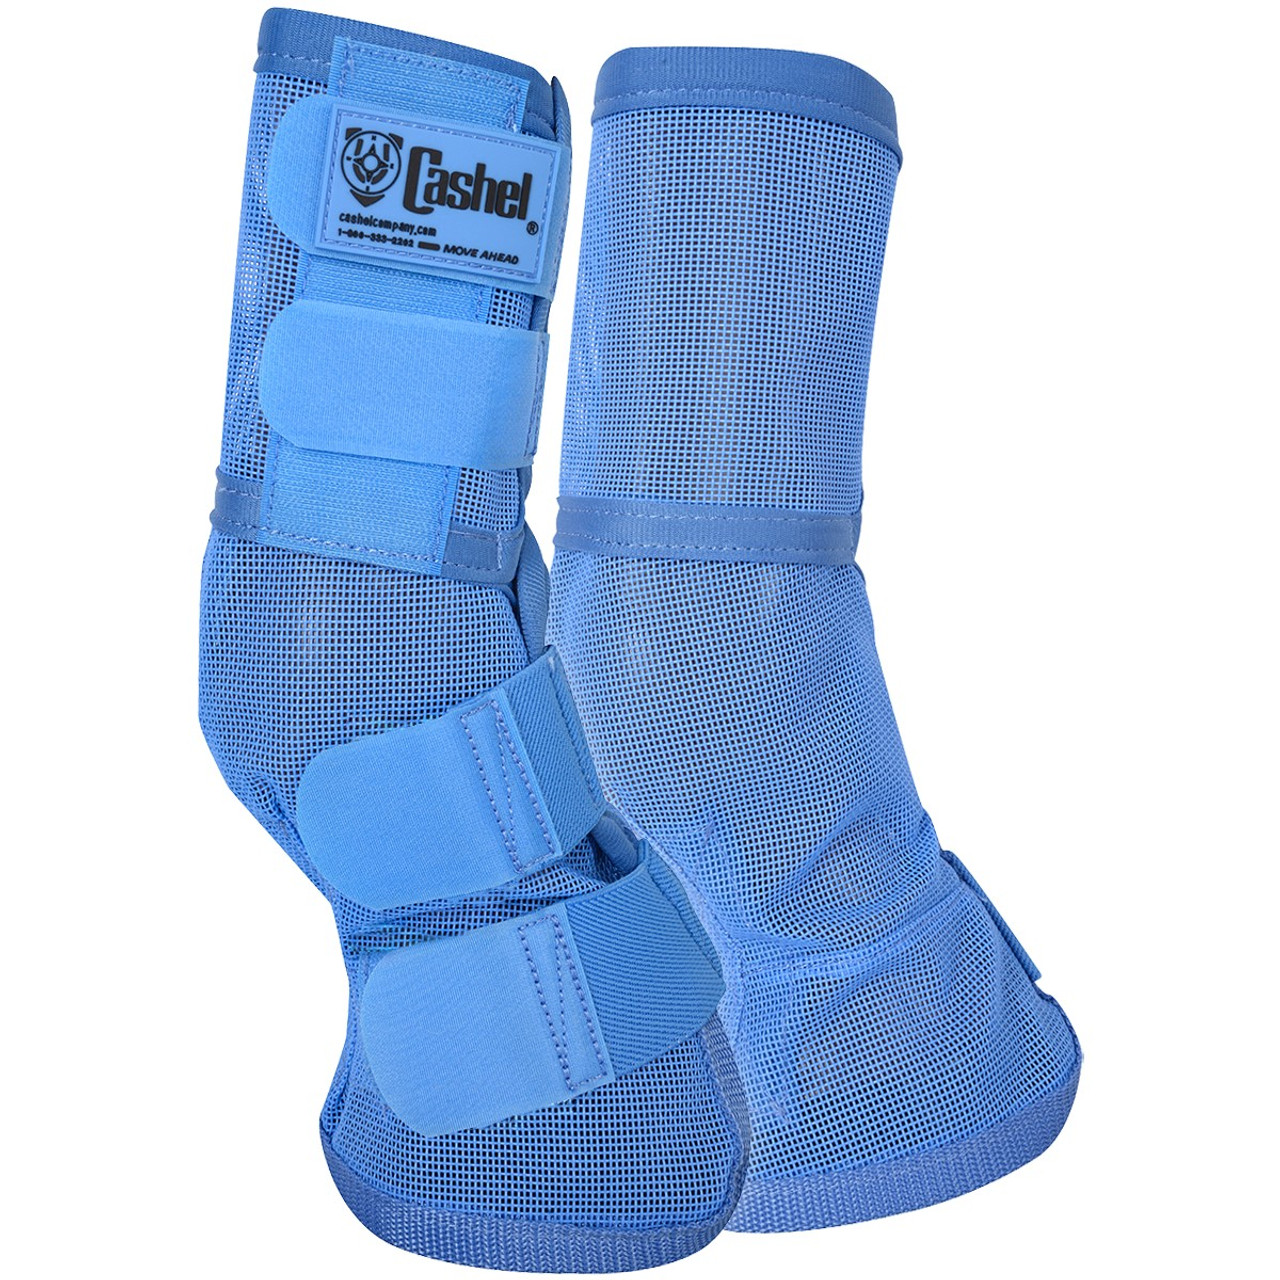 ARMA FLY SOCKS PROTECTION FOR HORSE LEGS AGAINST INSECTS - MySelleria